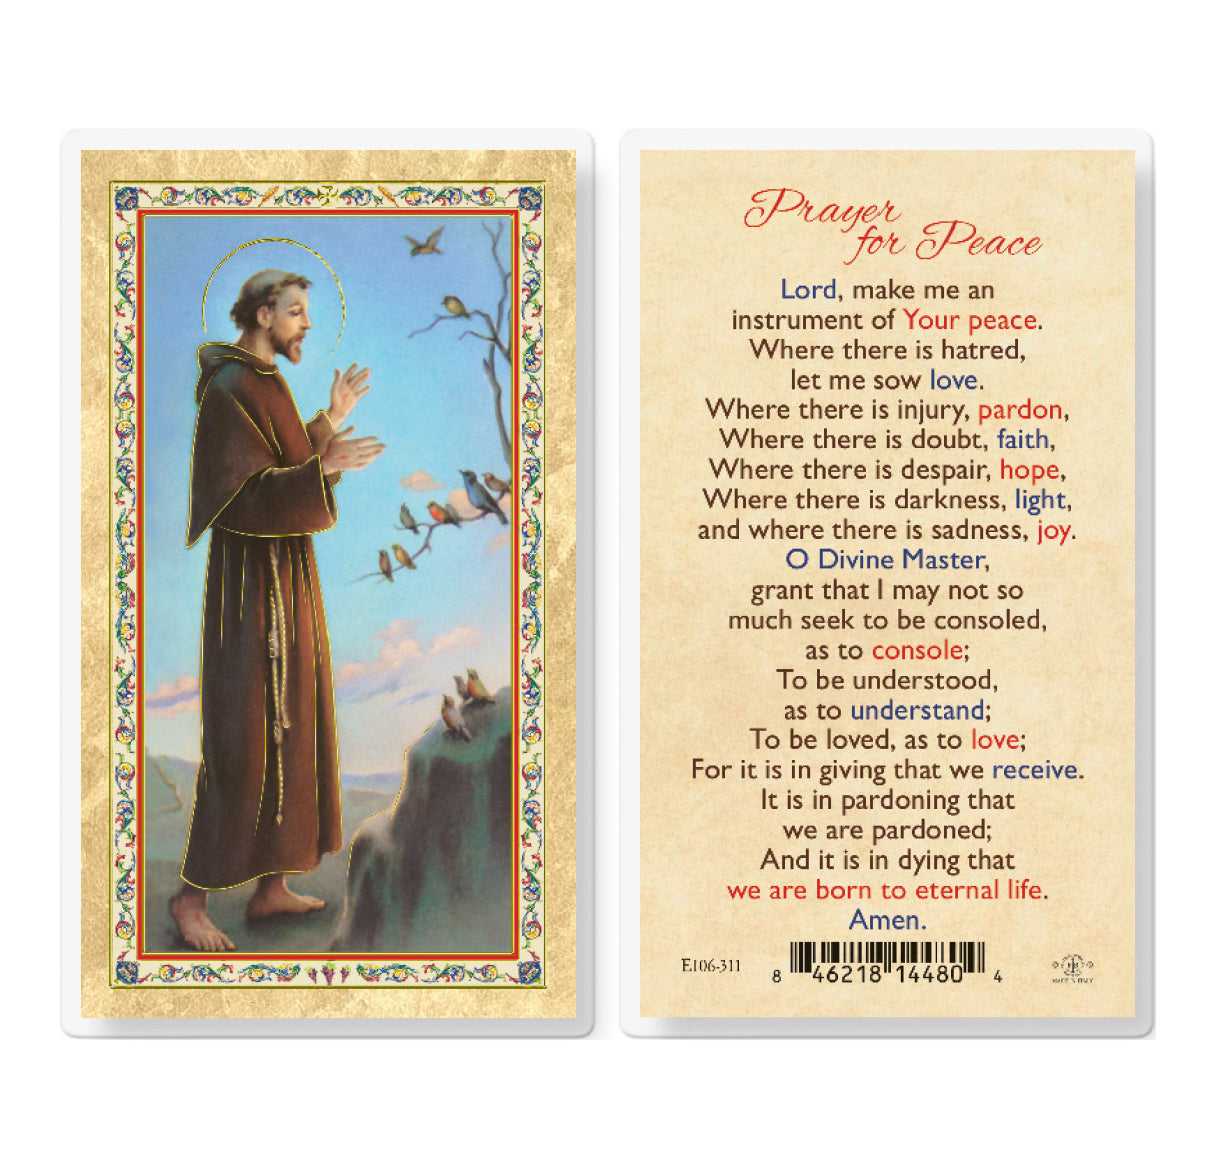 St. Francis Prayer for Peace Gold-Stamped Laminated Catholic Prayer Holy Card with Prayer on Back, Pack of 25